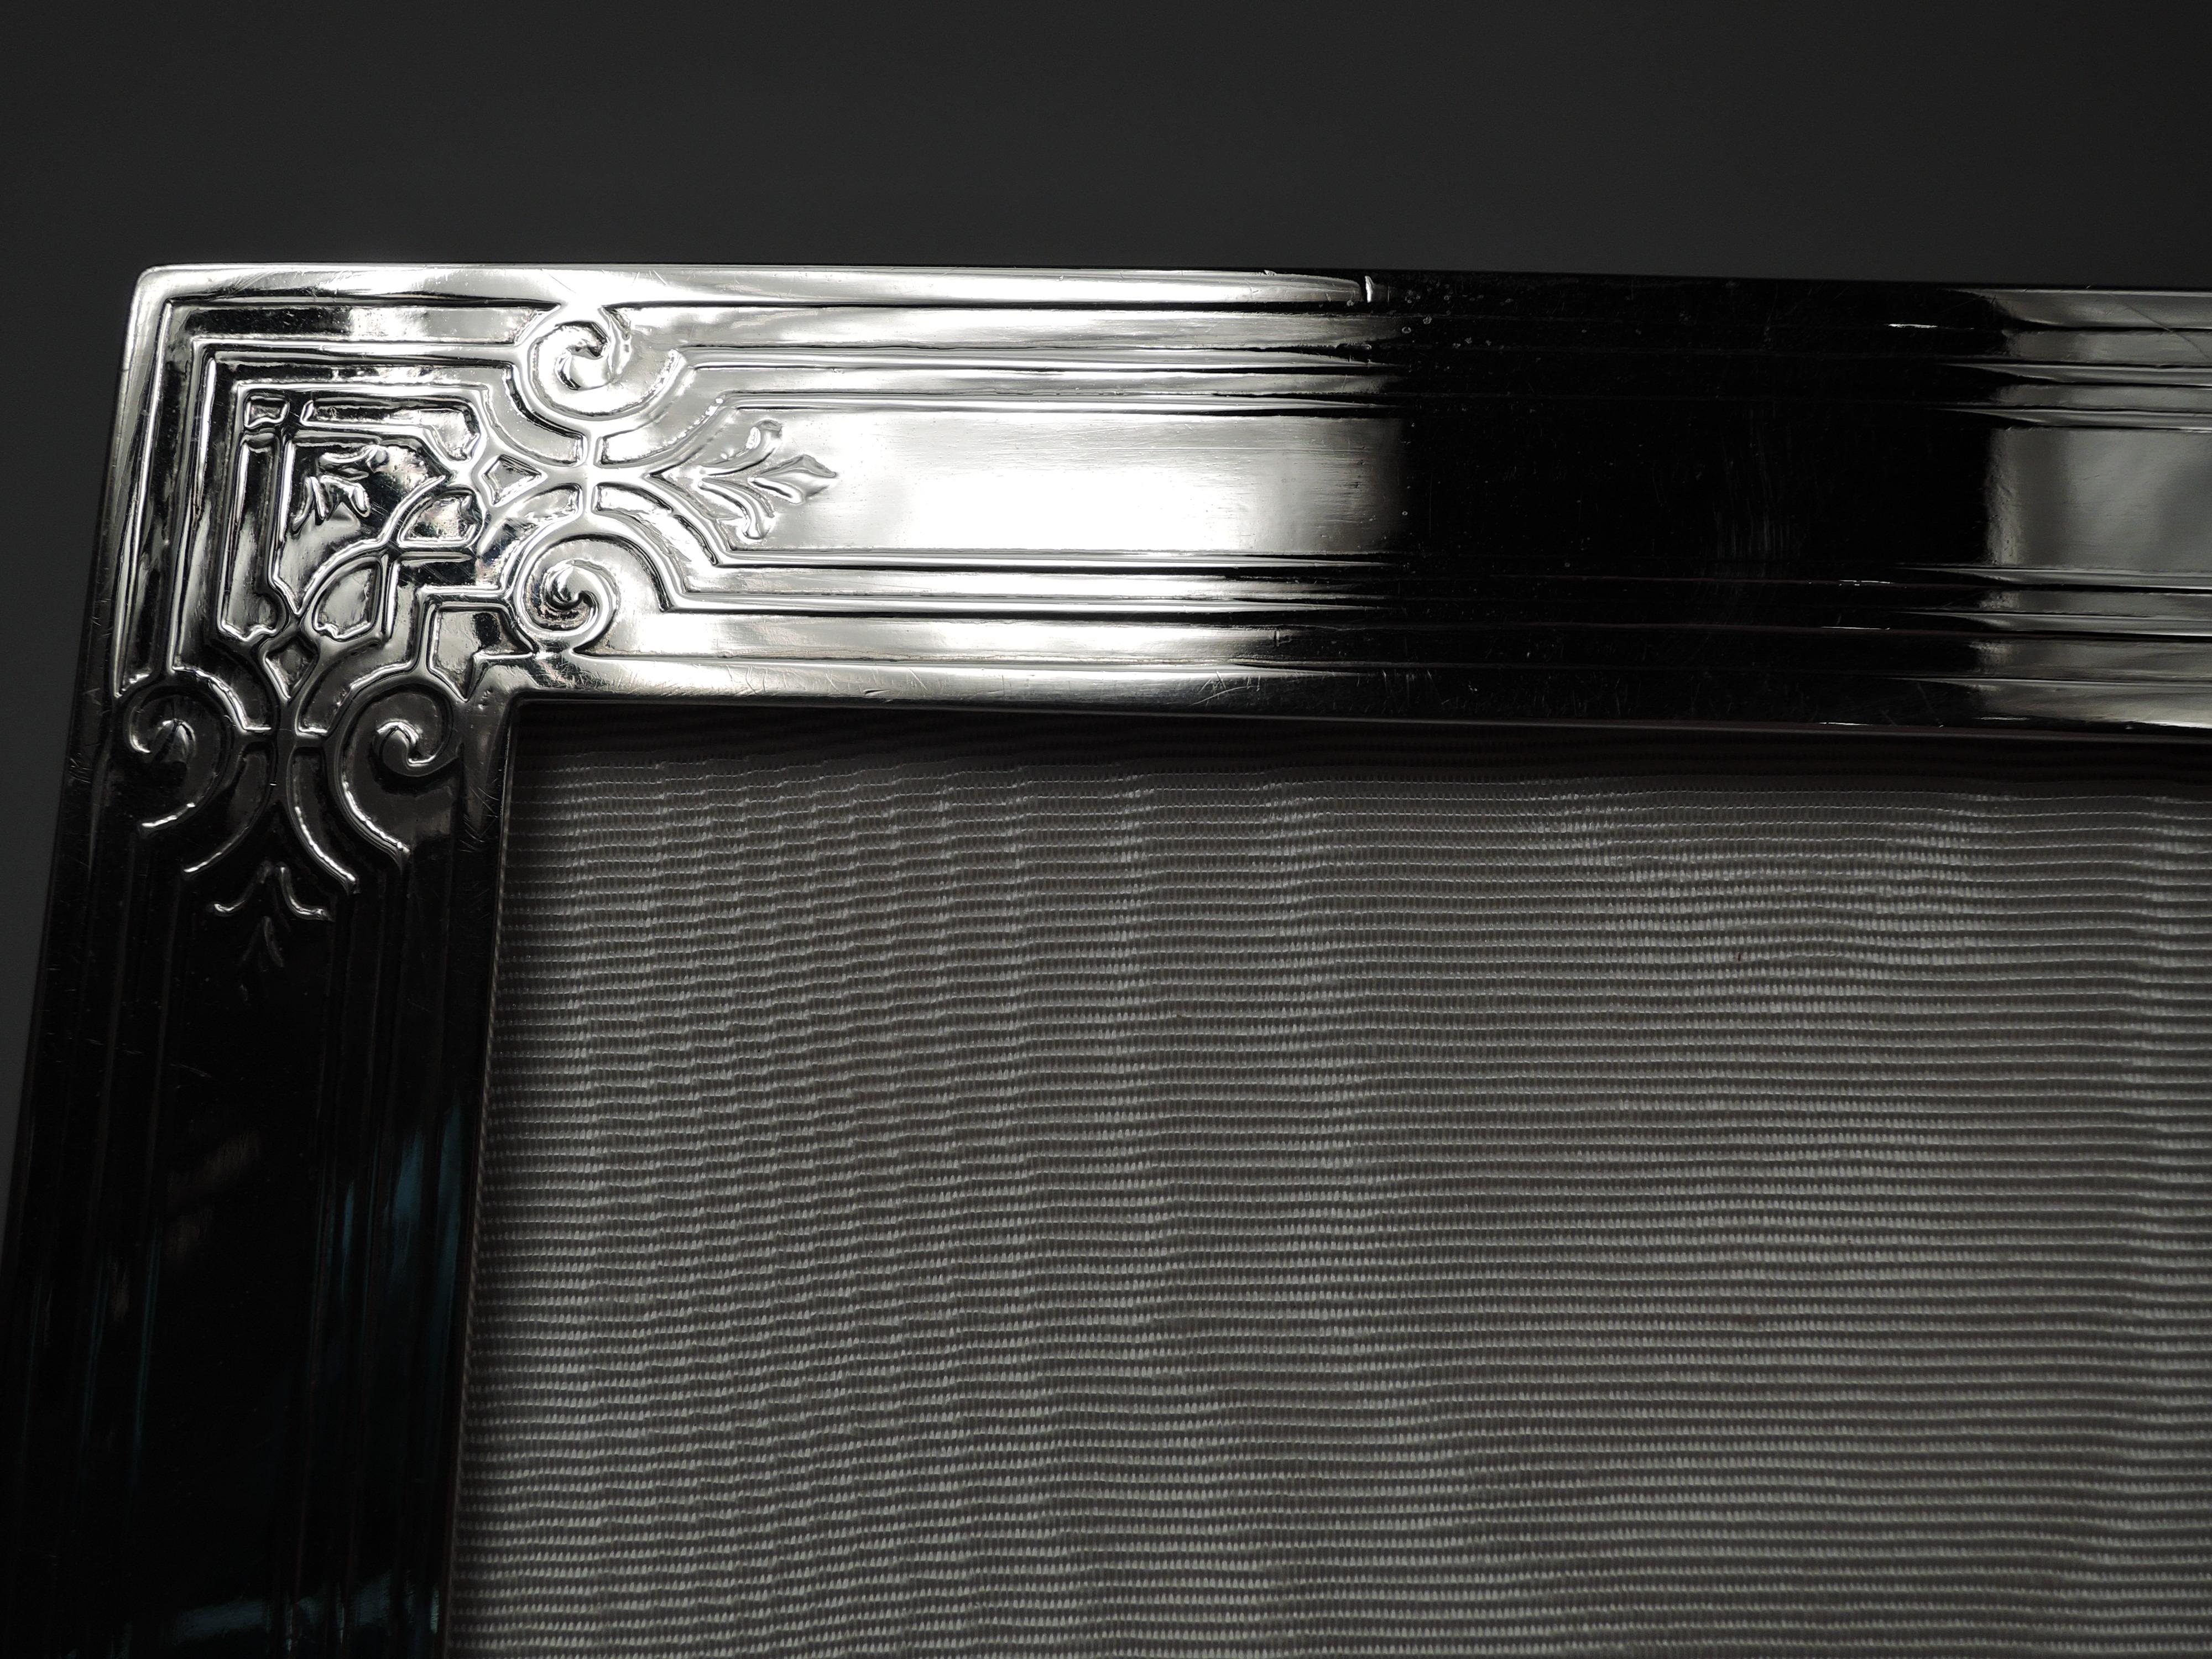 Very large Edwardian Classical sterling silver picture frame. Made by Tiffany & Co. in New York, ca 1910. Rectangular window in flat surround. On front acid-etched curvilinear frames with stylized leaves and fretwork corners. Sides and top have